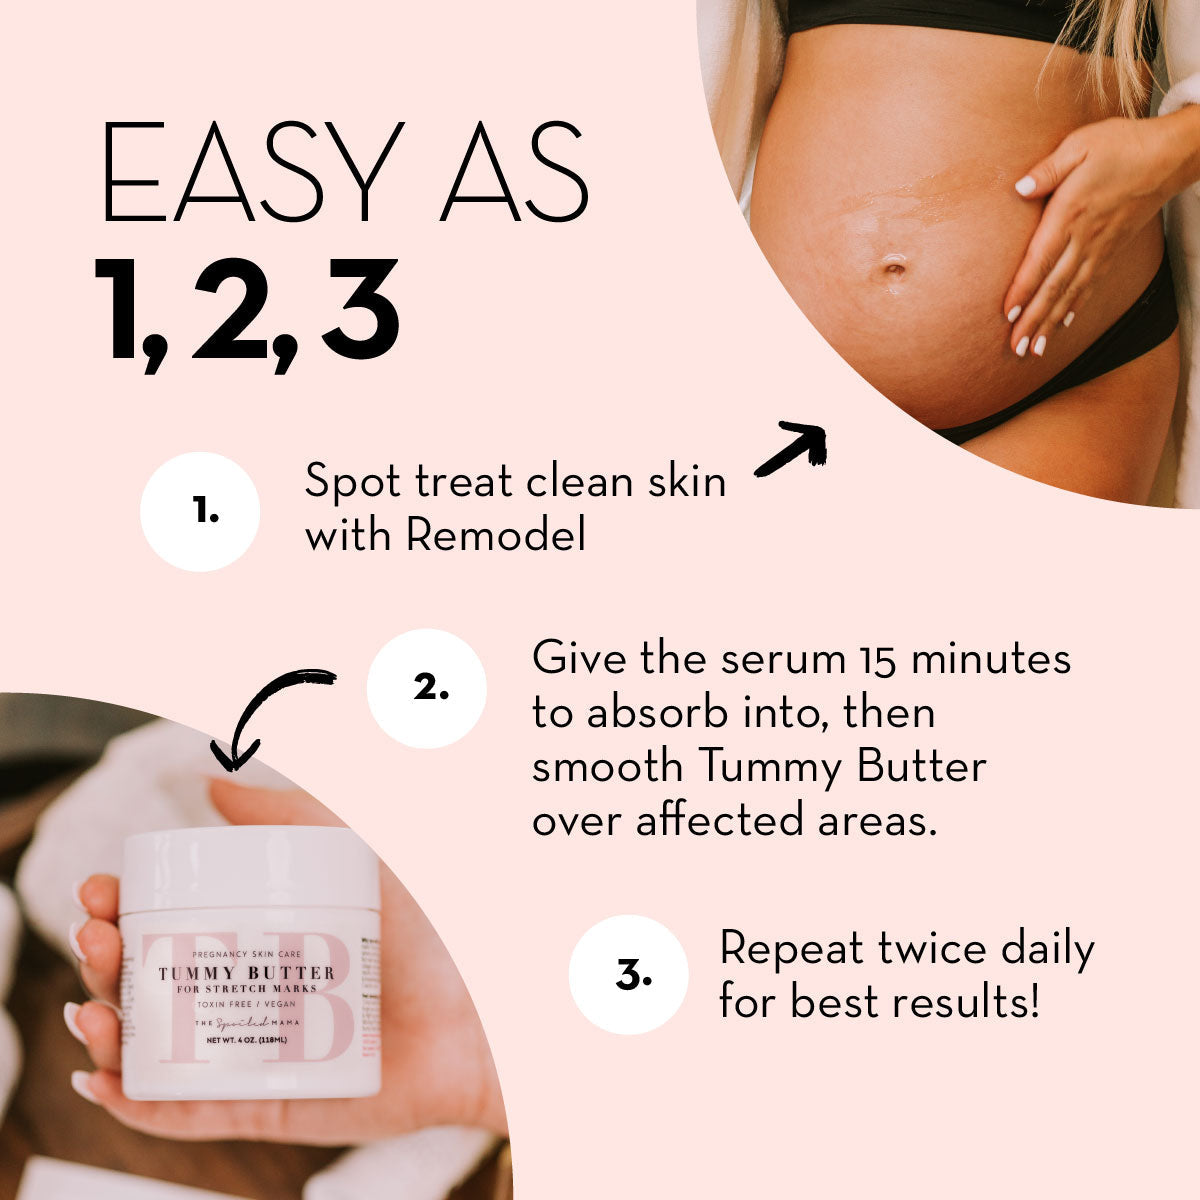 Pregnancy Belly Cream > New Mom Gift > Gift For Pregnant Woman > Pregnancy Creams To Prevent Stretch Marks > Stretch Mark Treatment - Bye, Bye Stretchies Duo